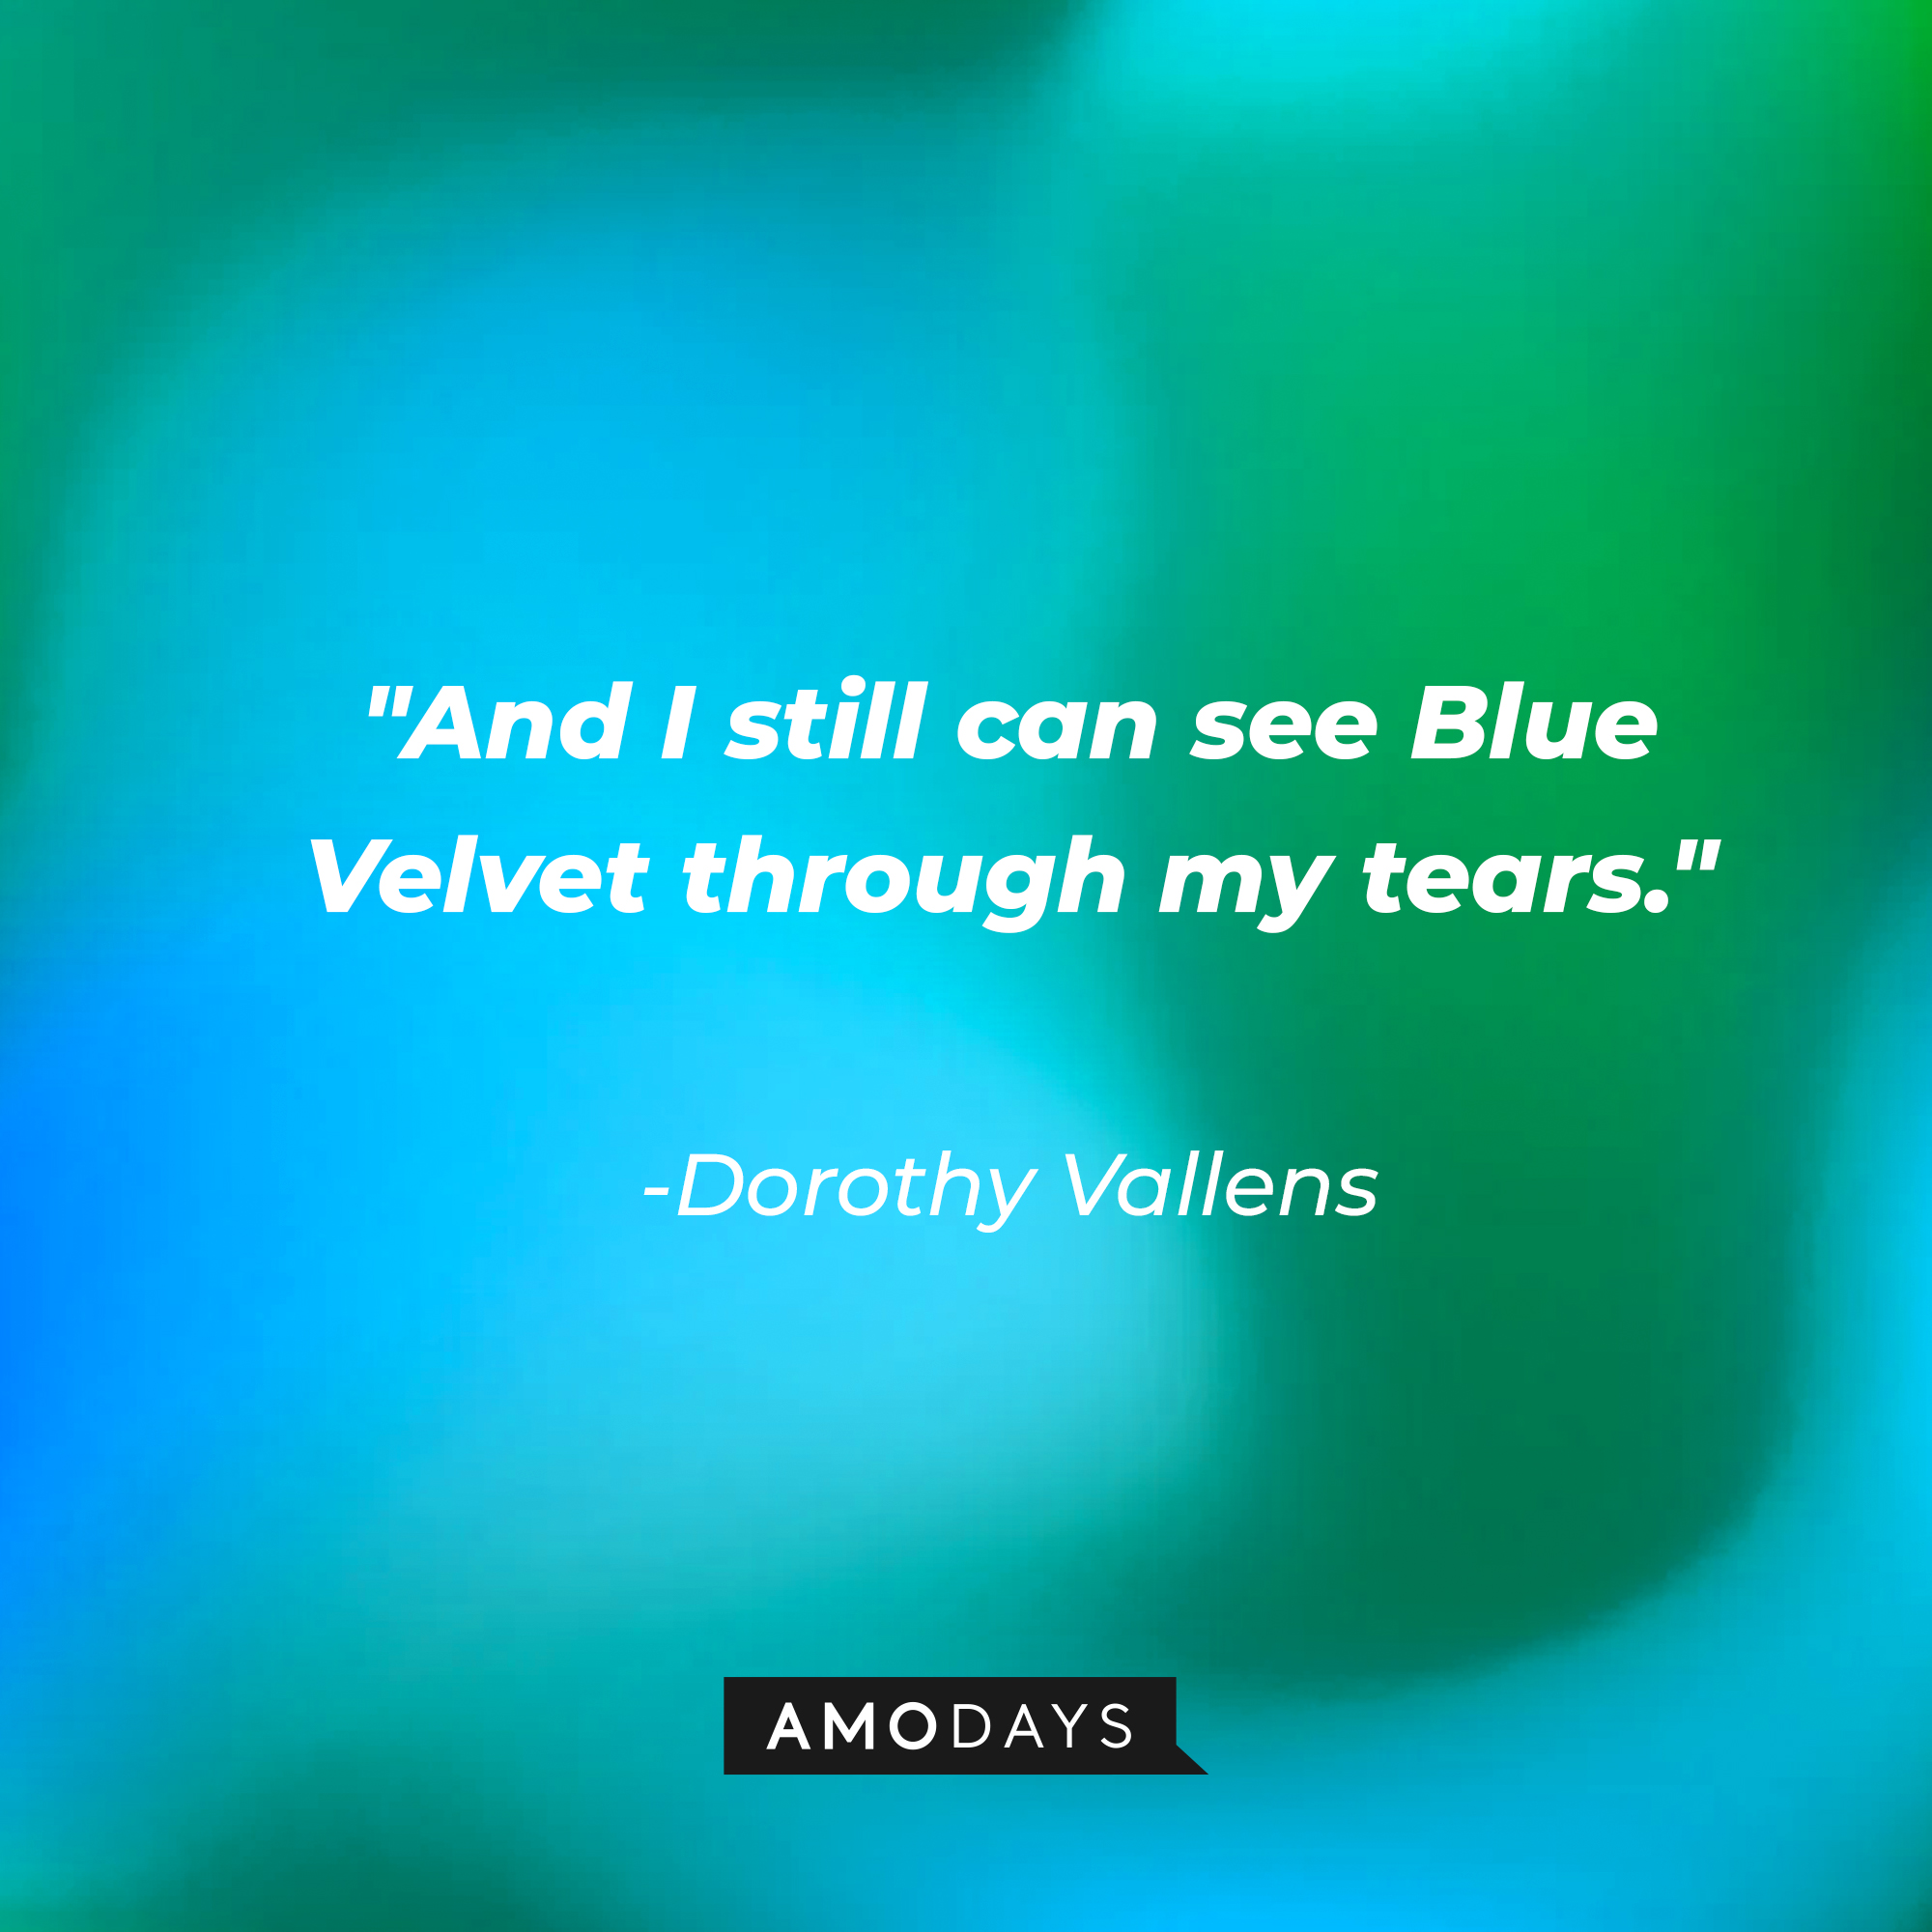 Dorothy Vallens' quote: "And I still can see Blue Velvet through my tears." | Source: facebook.com/BlueVelvetMovie